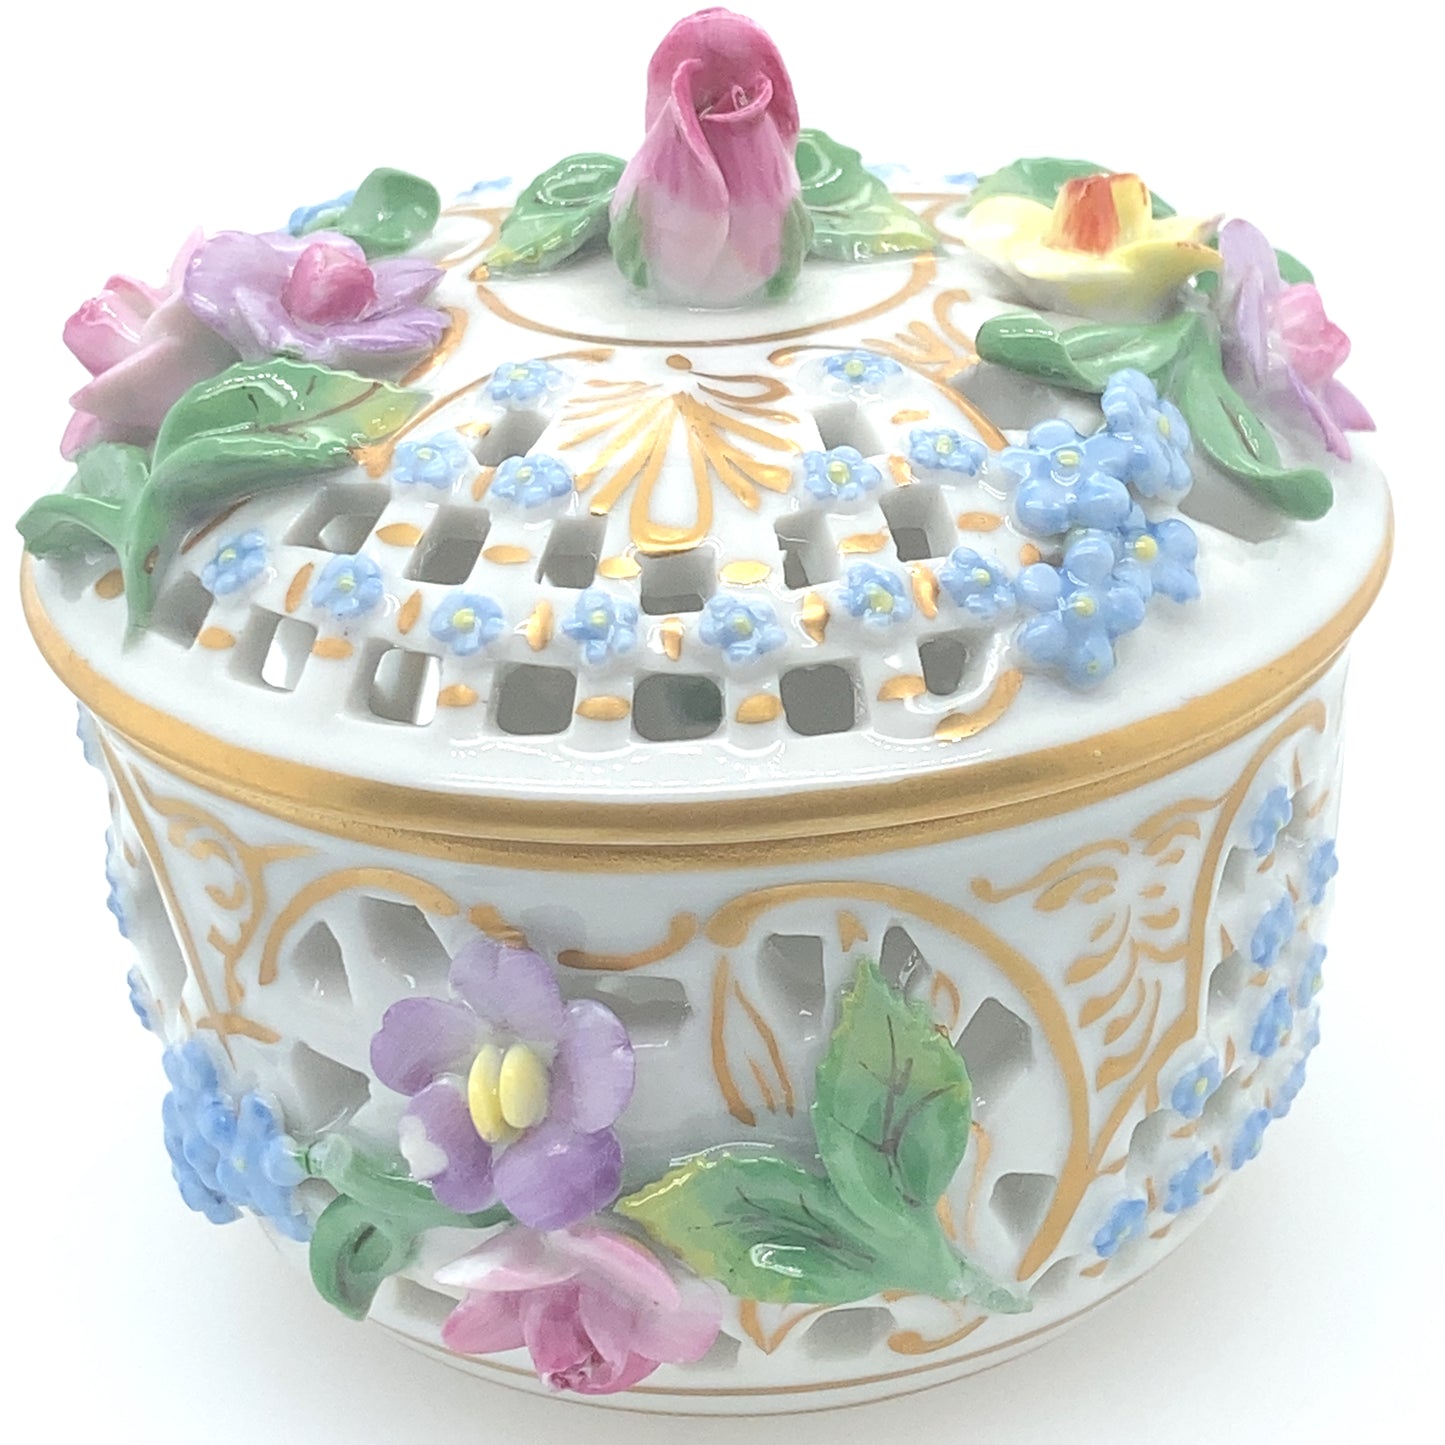 Porcelain figurine from Germany. Jewelry or candy box, hand painted designed with gold.